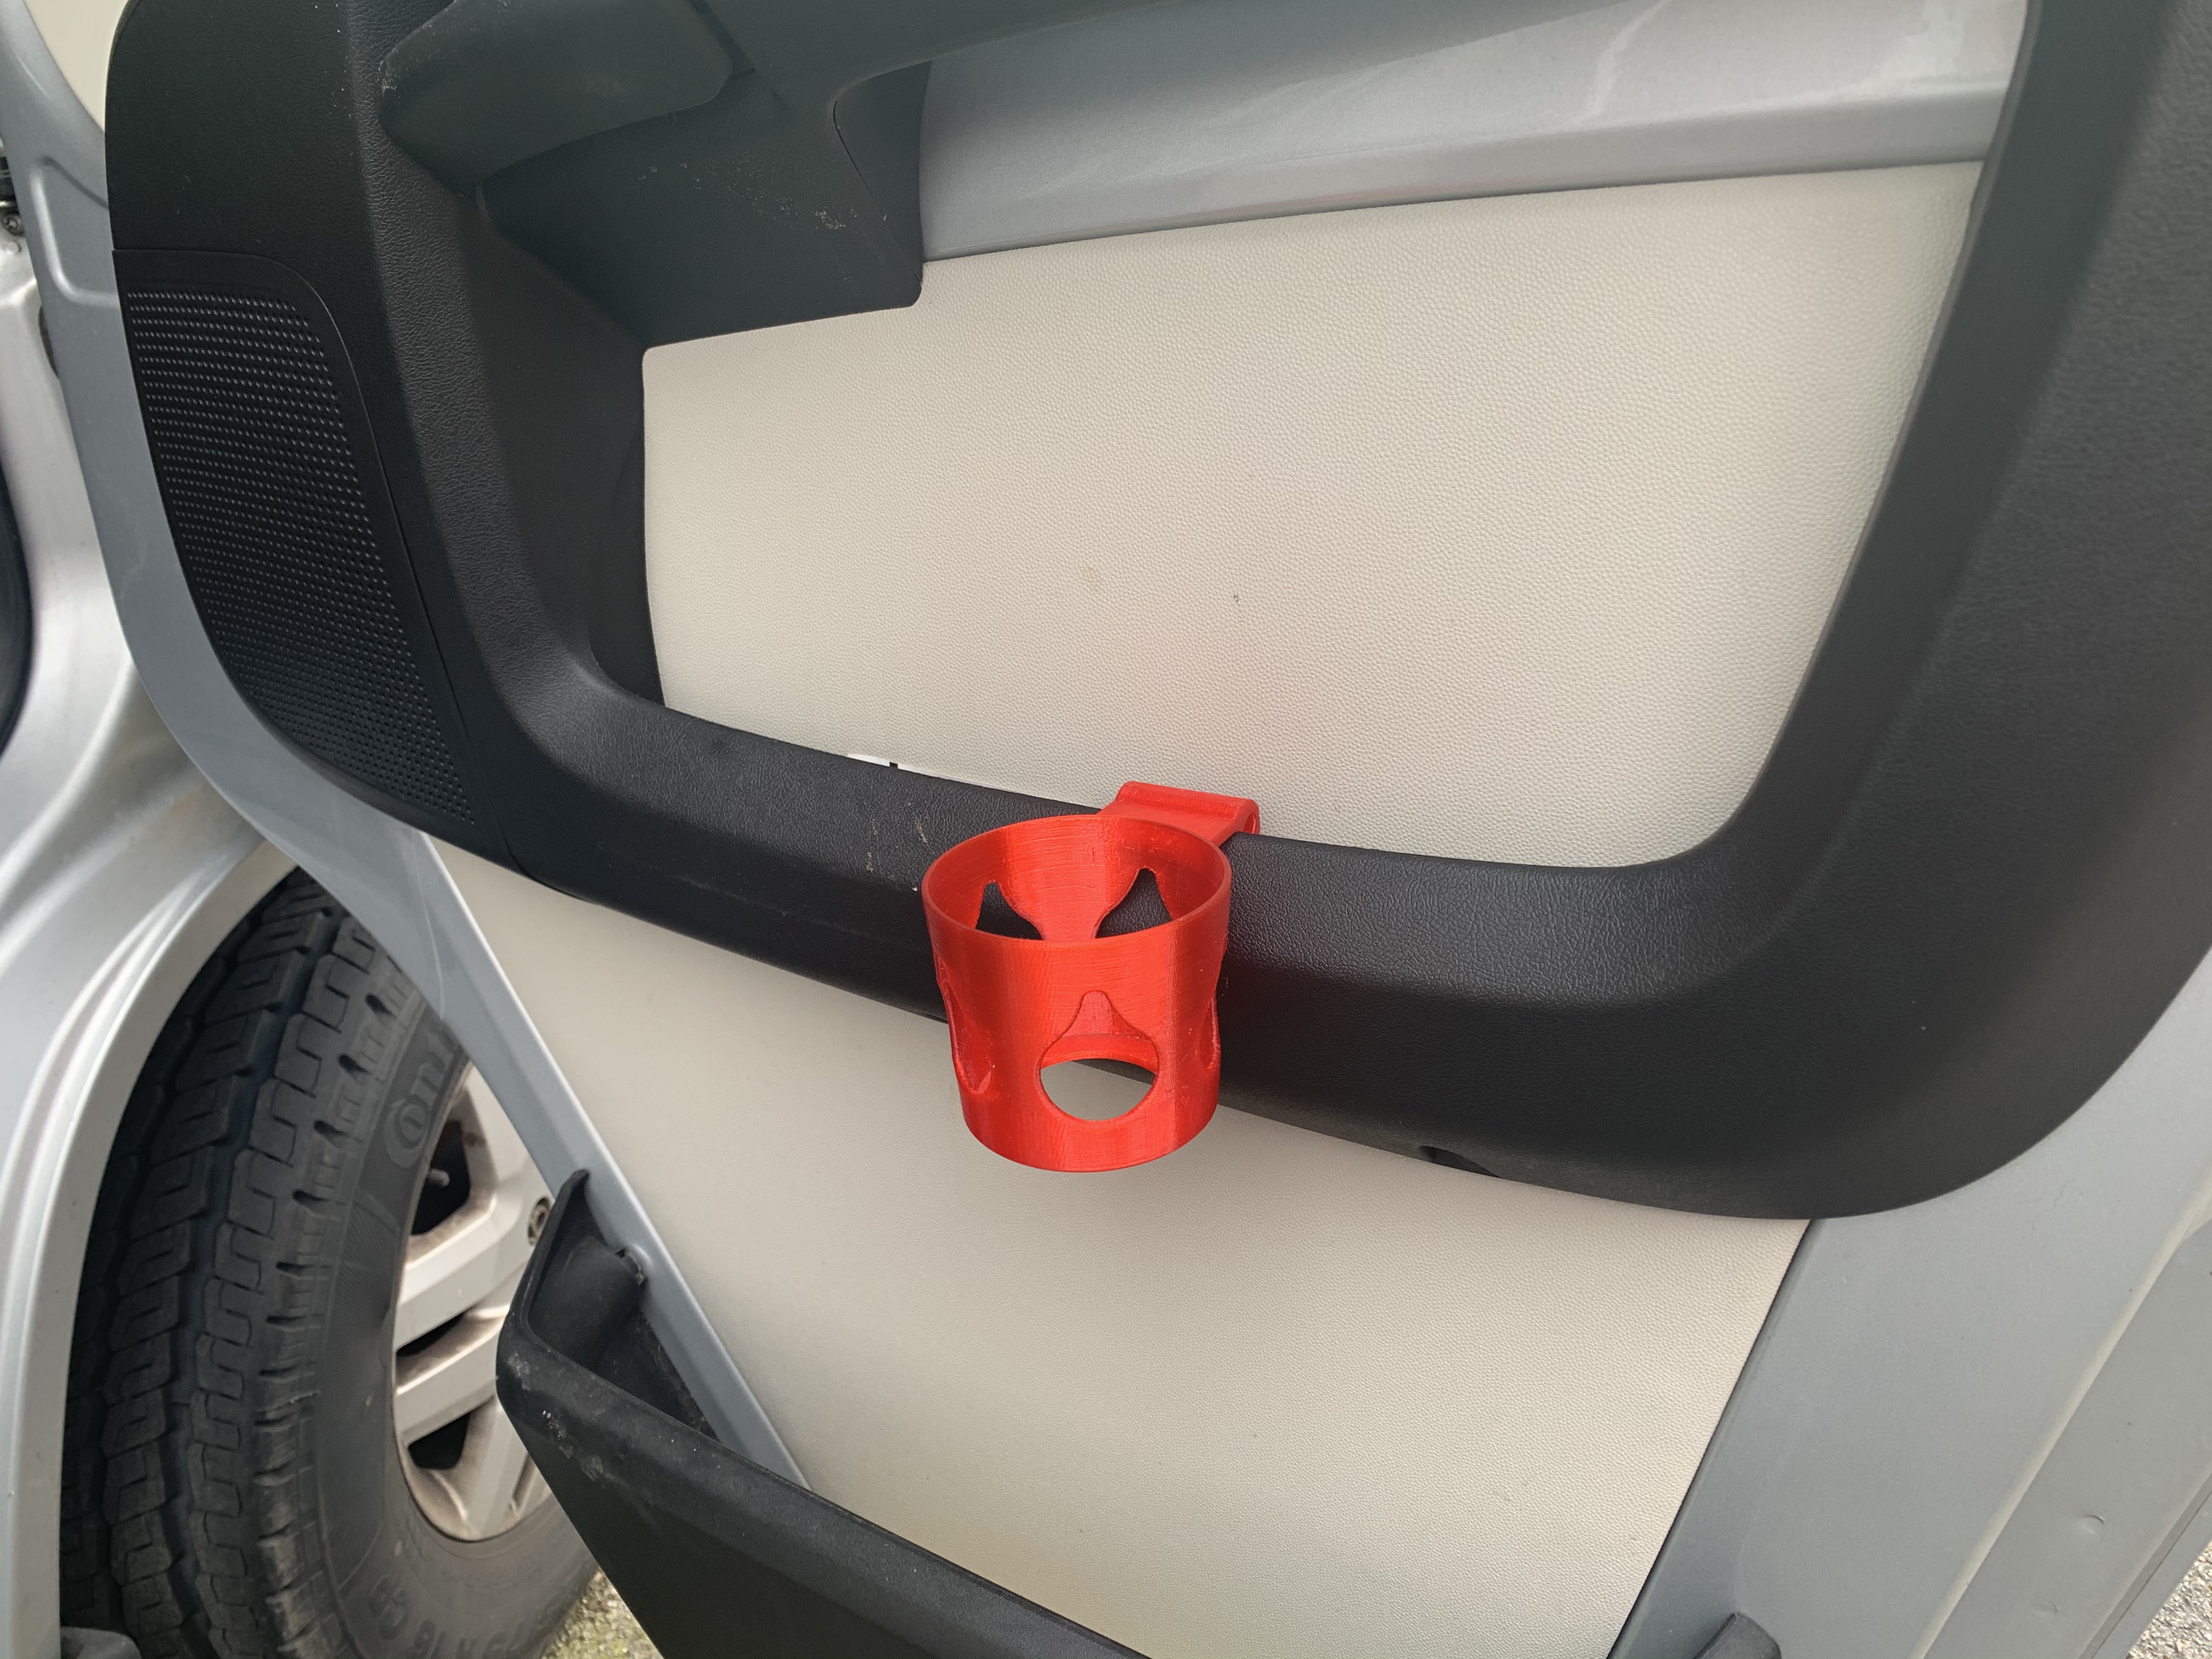 Motorhome Cup Holder - clip over